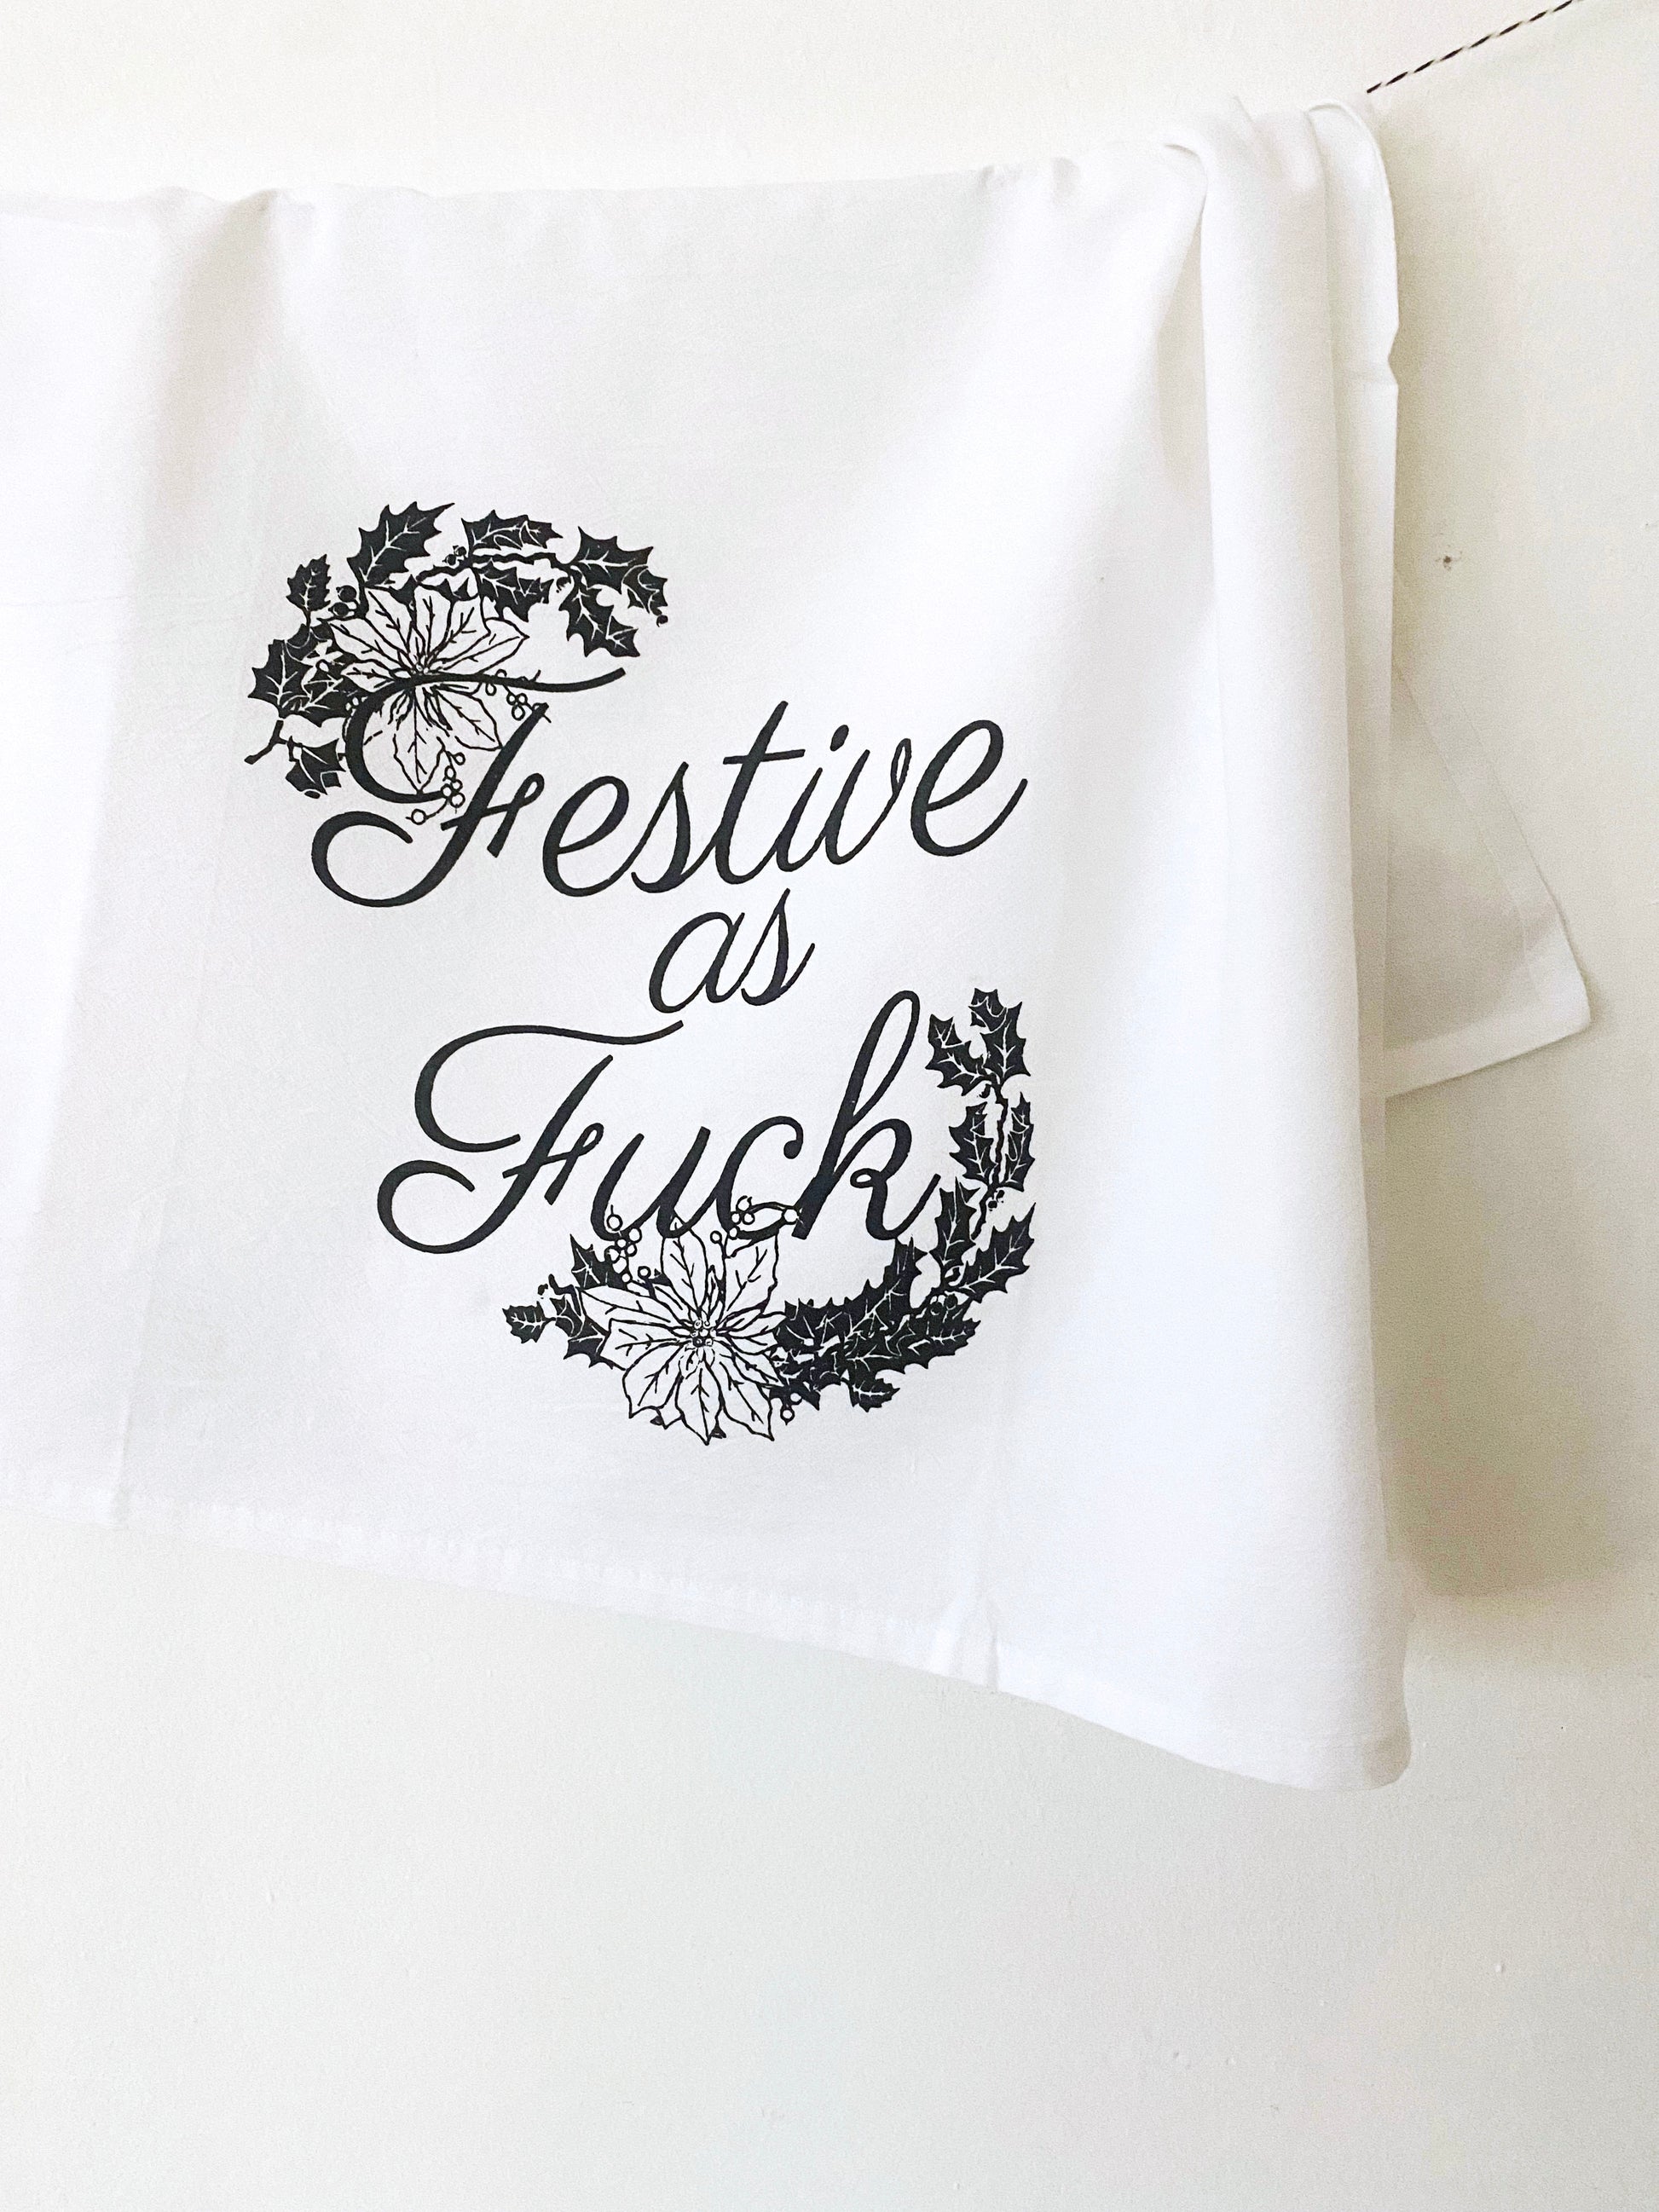 festive as fuck funny kitchen towel with retro vintage style kitsch kitschmas cute christmas decor funny holiday home gift for host poinsettia flowers cute coin laundry print shop montana